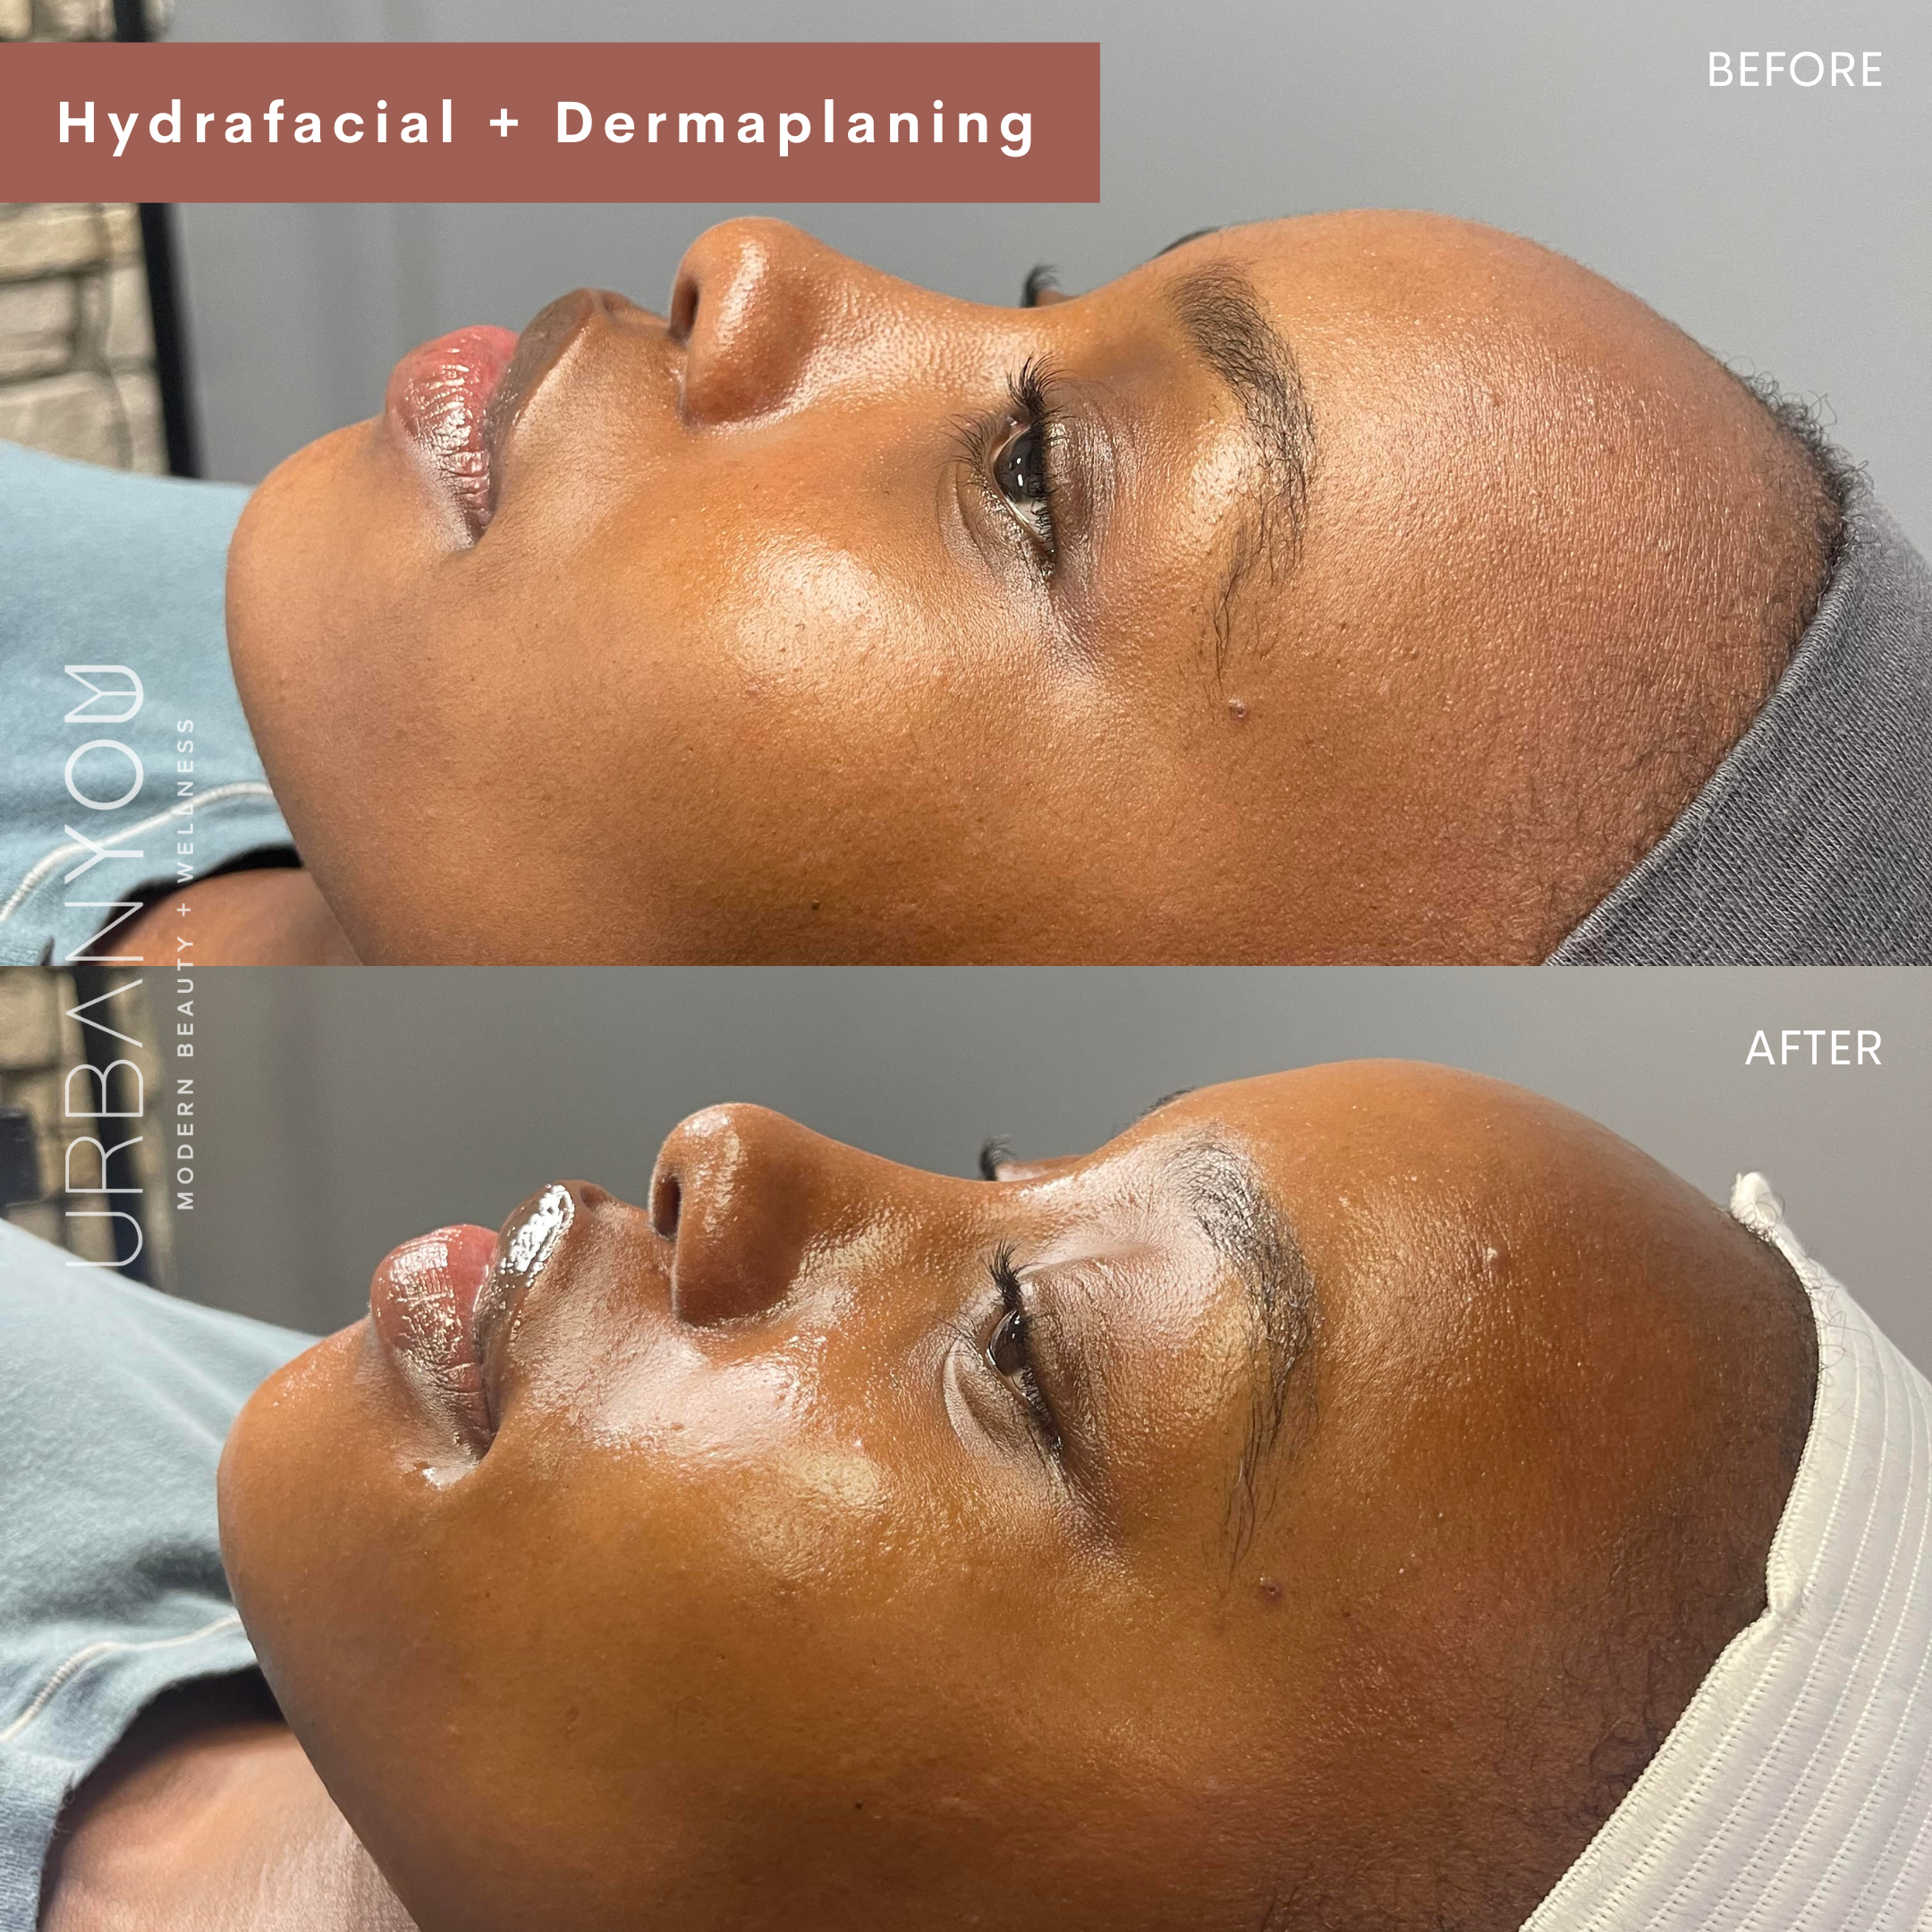 HydraFacial before and after photo at Urban You, the best medical spa in Michigan